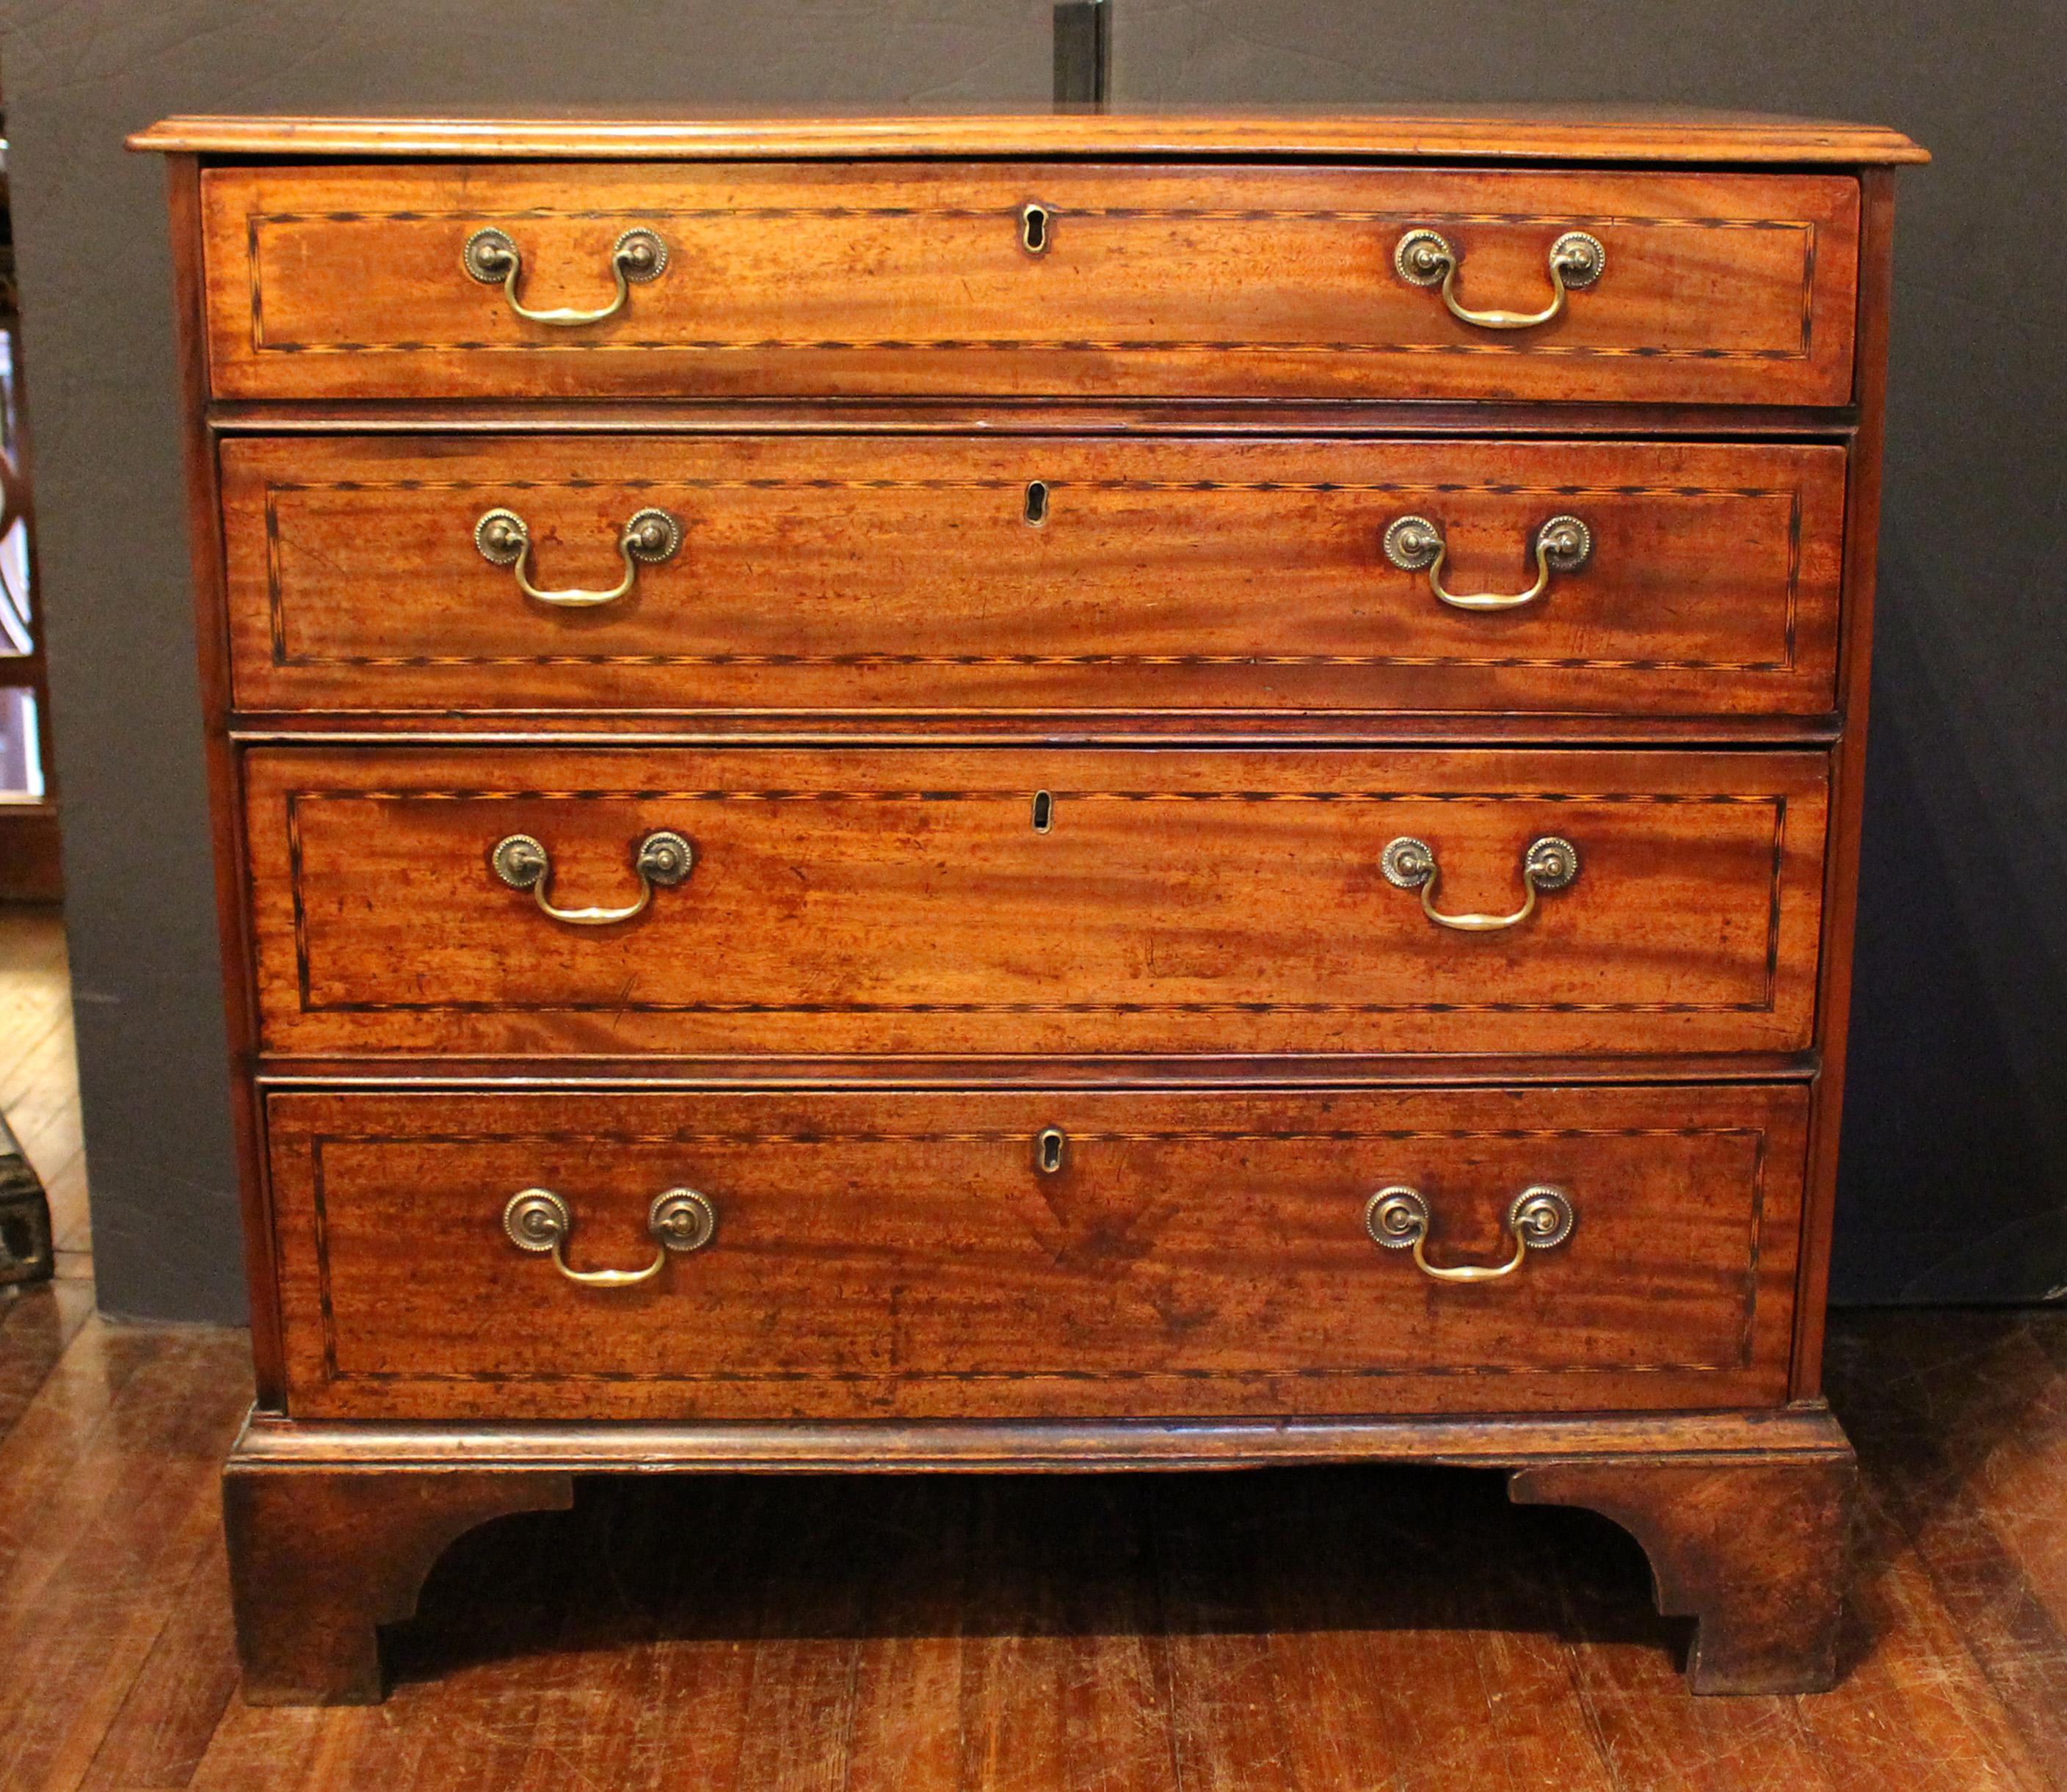 Circa 1760-70 George III chest of drawers, English. 4 graduated drawers form. Mahogany. Solid mahogany drawer fronts with oak & deal secondary woods. Checkered line inlaid drawer fronts. Thumb molded top. Well shaped bracket feet. Original bail &